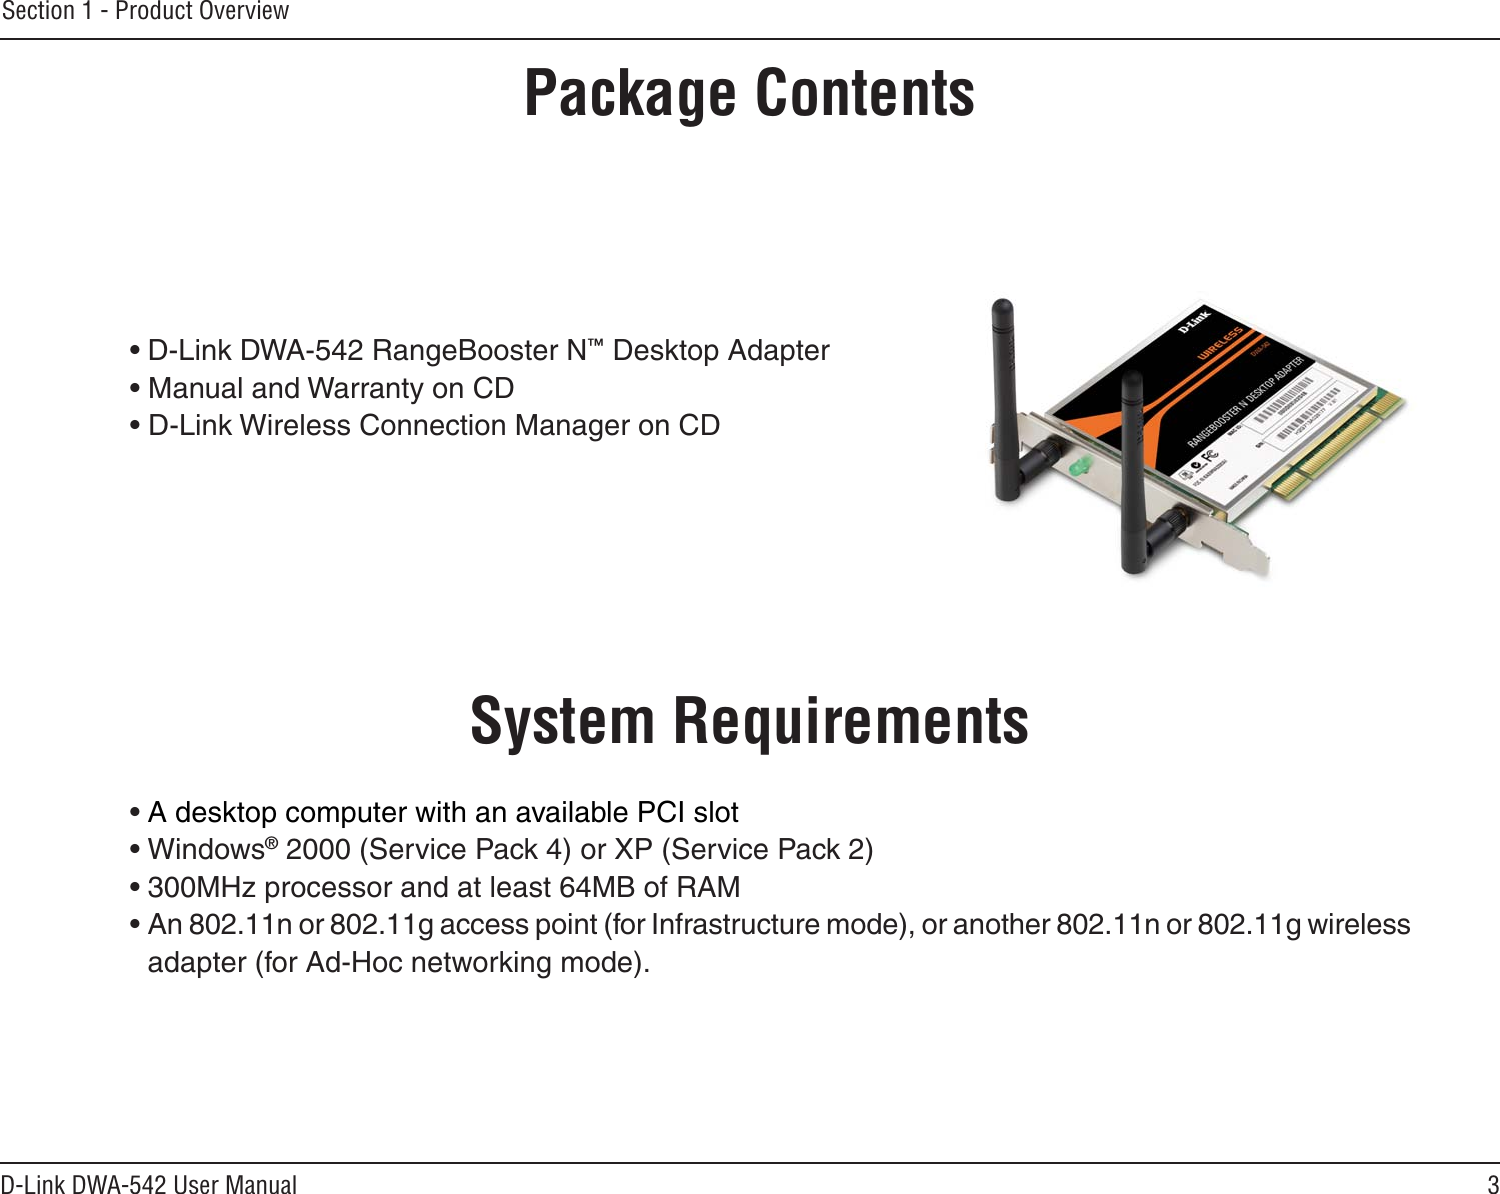 3D-Link DWA-542 User ManualSection 1 - Product Overview• D-Link DWA-542 RangeBooster N™ Desktop Adapter• Manual and Warranty on CD• D-Link Wireless Connection Manager on CDSystem Requirements• A desktop computer with an available PCI slot• Windows® 2000 (Service Pack 4) or XP (Service Pack 2)• 300MHz processor and at least 64MB of RAM• An 802.11n or 802.11g access point (for Infrastructure mode), or another 802.11n or 802.11g wireless  adapter (for Ad-Hoc networking mode).Product OverviewPackage Contents